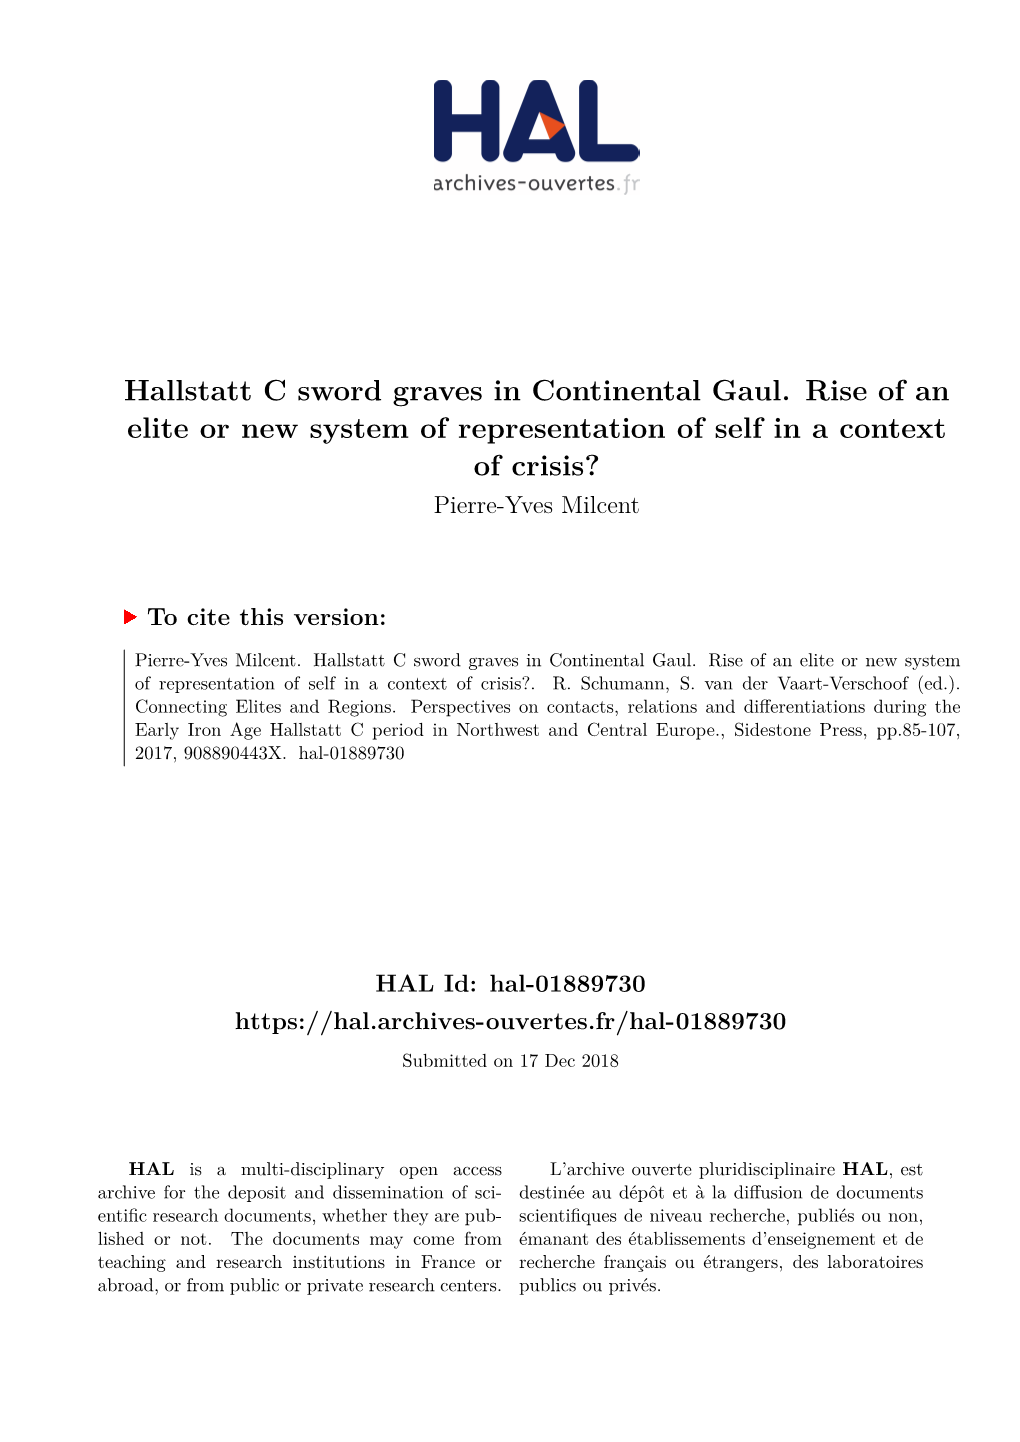 Hallstatt C Sword Graves in Continental Gaul. Rise of an Elite Or New System of Representation of Self in a Context of Crisis? Pierre-Yves Milcent